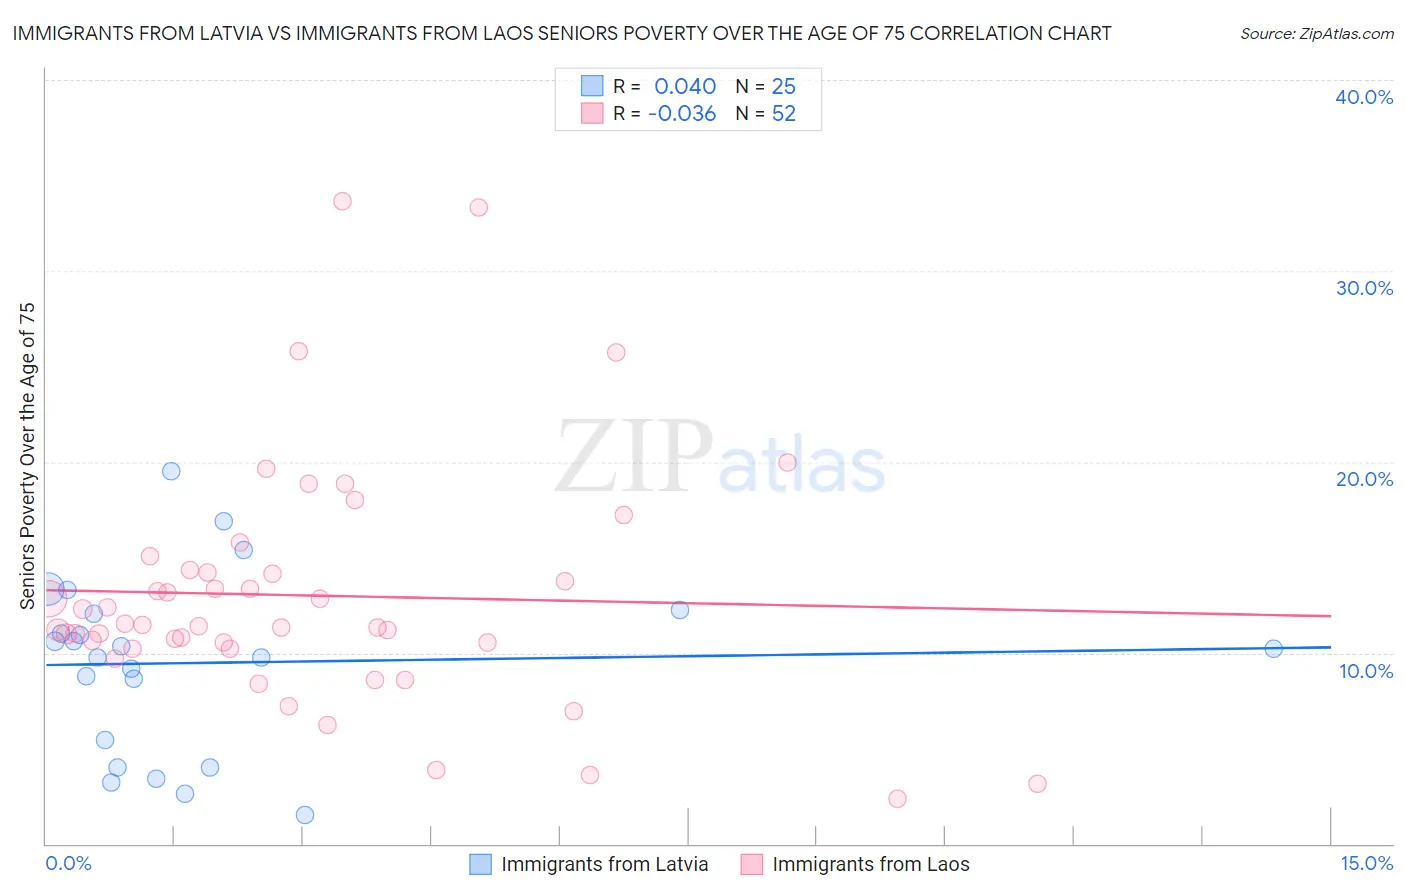 Immigrants from Latvia vs Immigrants from Laos Seniors Poverty Over the Age of 75